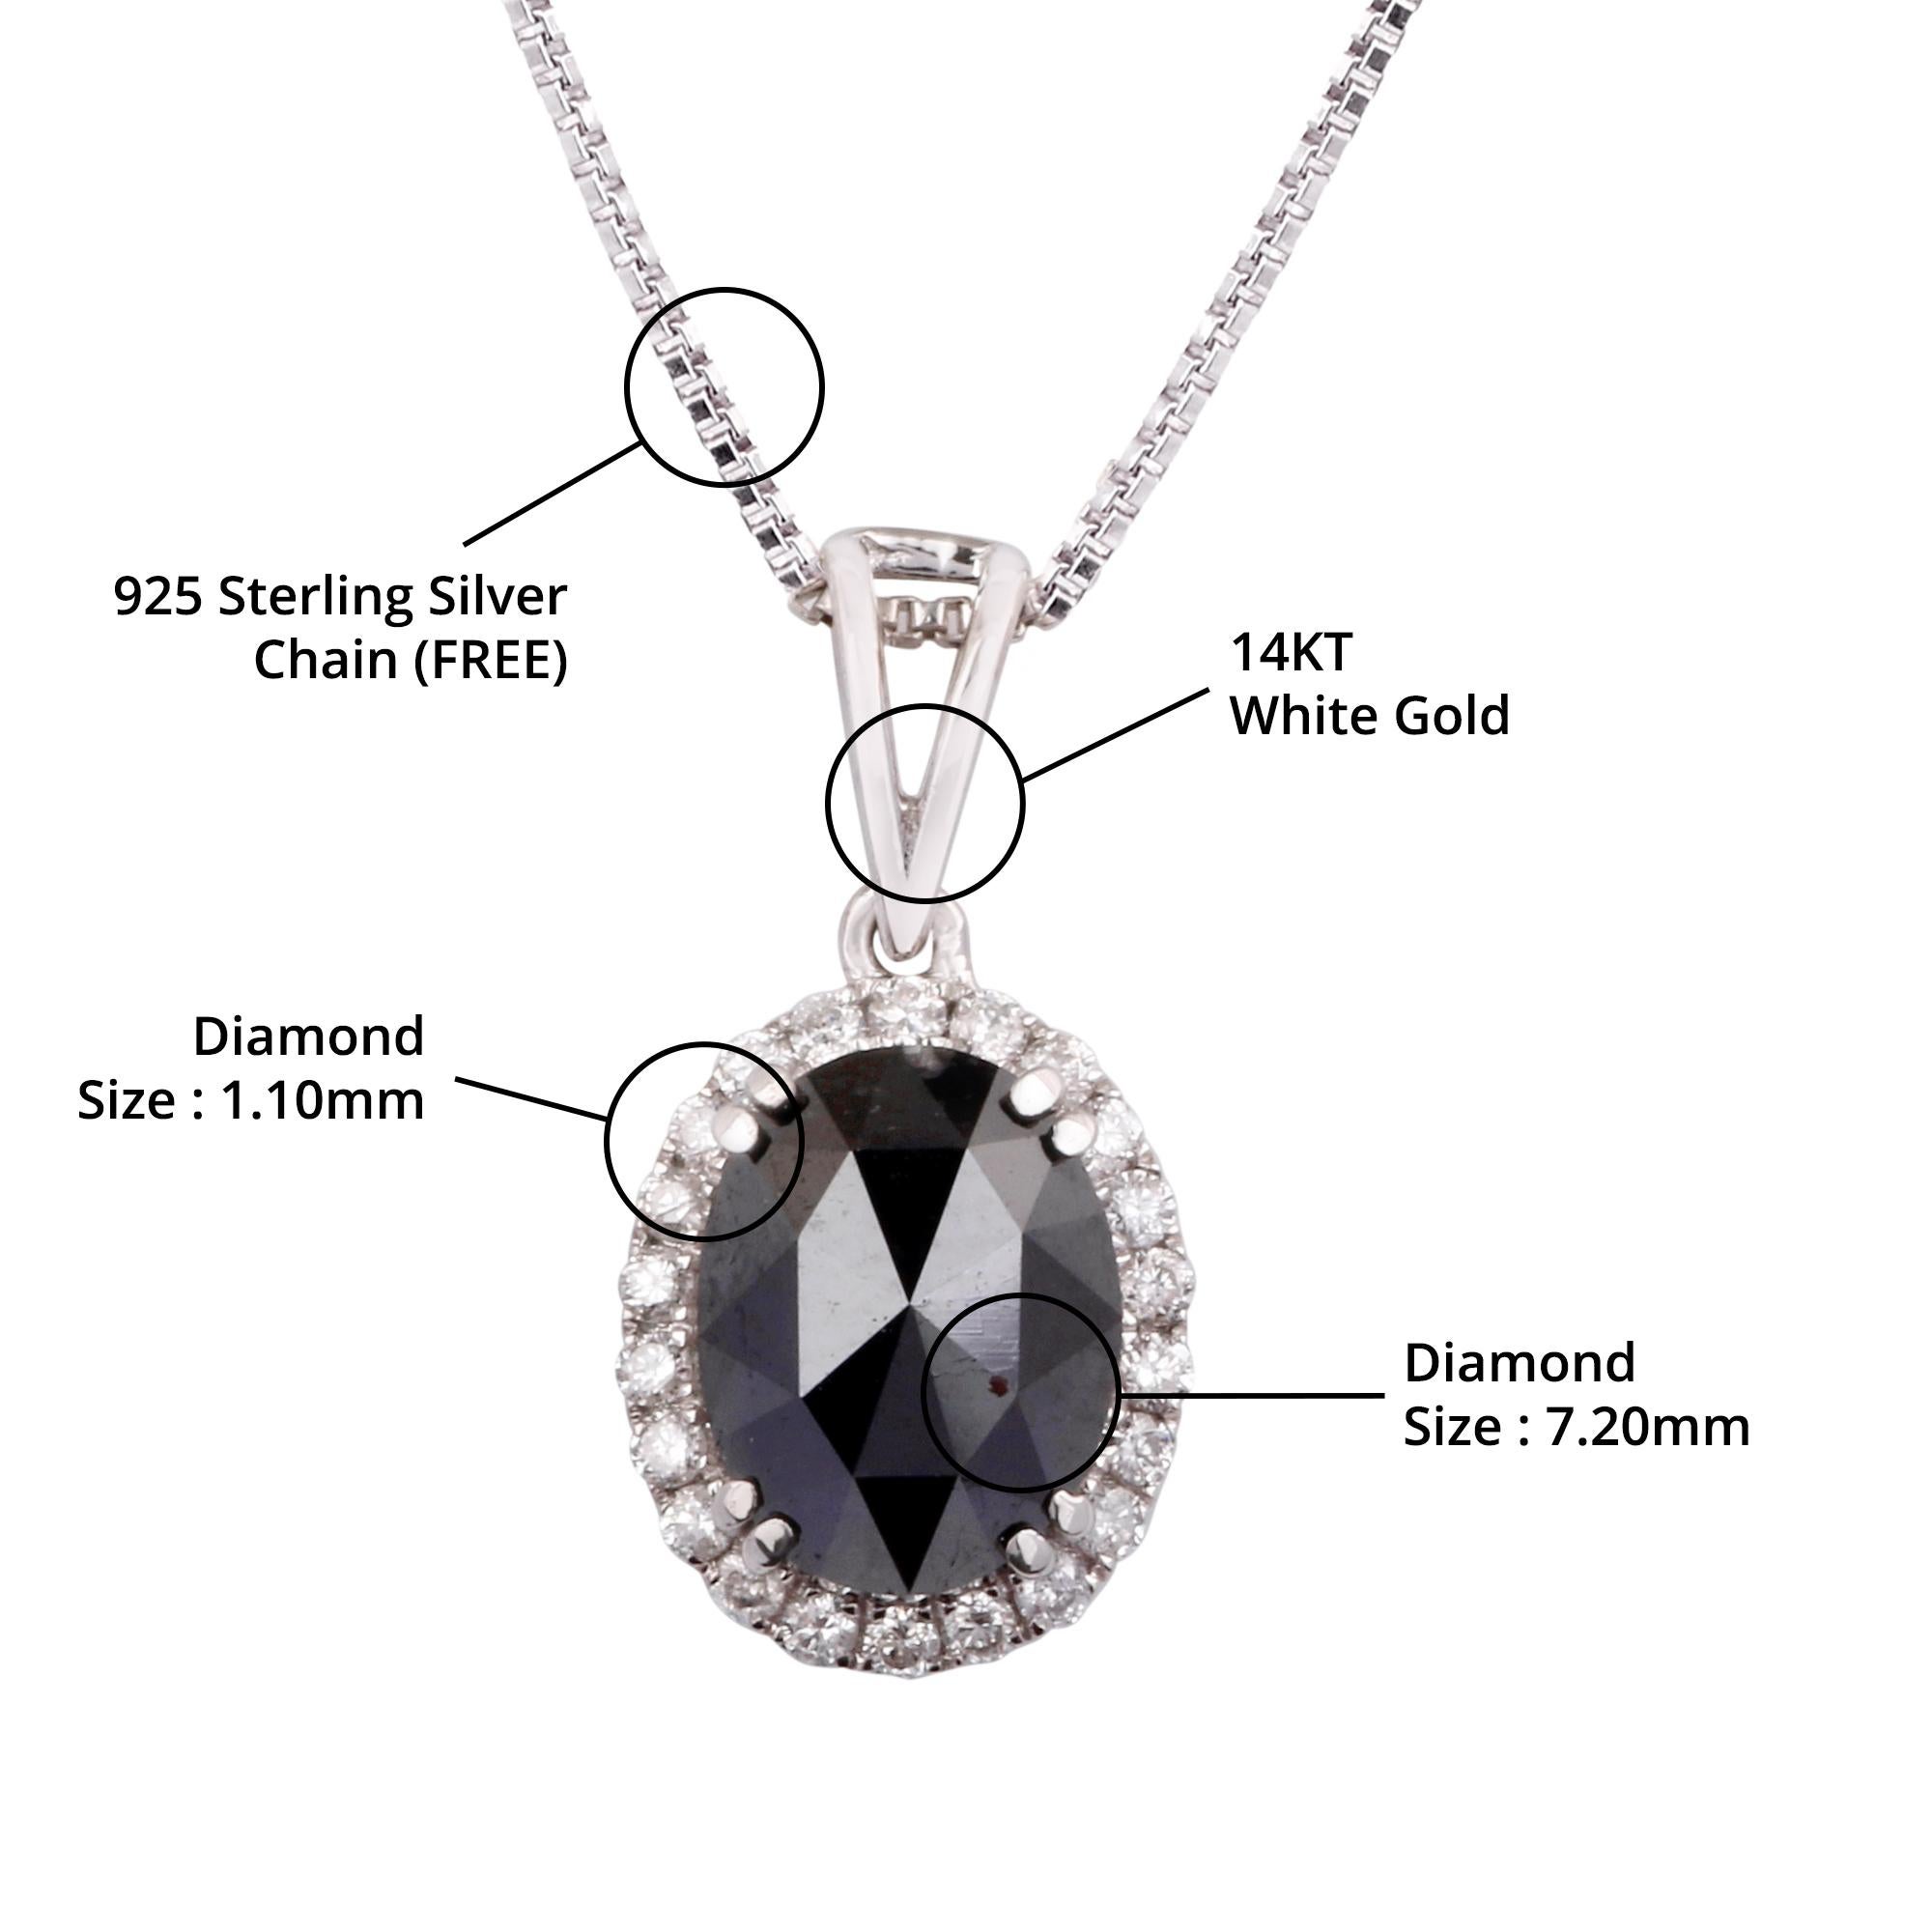 Item details:-

✦ SKU:- JPD00165WWW

✦ Material :- Gold

✦ Metal Purity : 14K White Gold

✦ Gemstone Specification:- 
✧ Clear Diamond Round (l1/H1) - 1.10mm - 22 Pcs
✧ Real Black Diamond - 7.20 mm - 1 Pc


✦ Approx. Diamond Carat Weight : 0.138